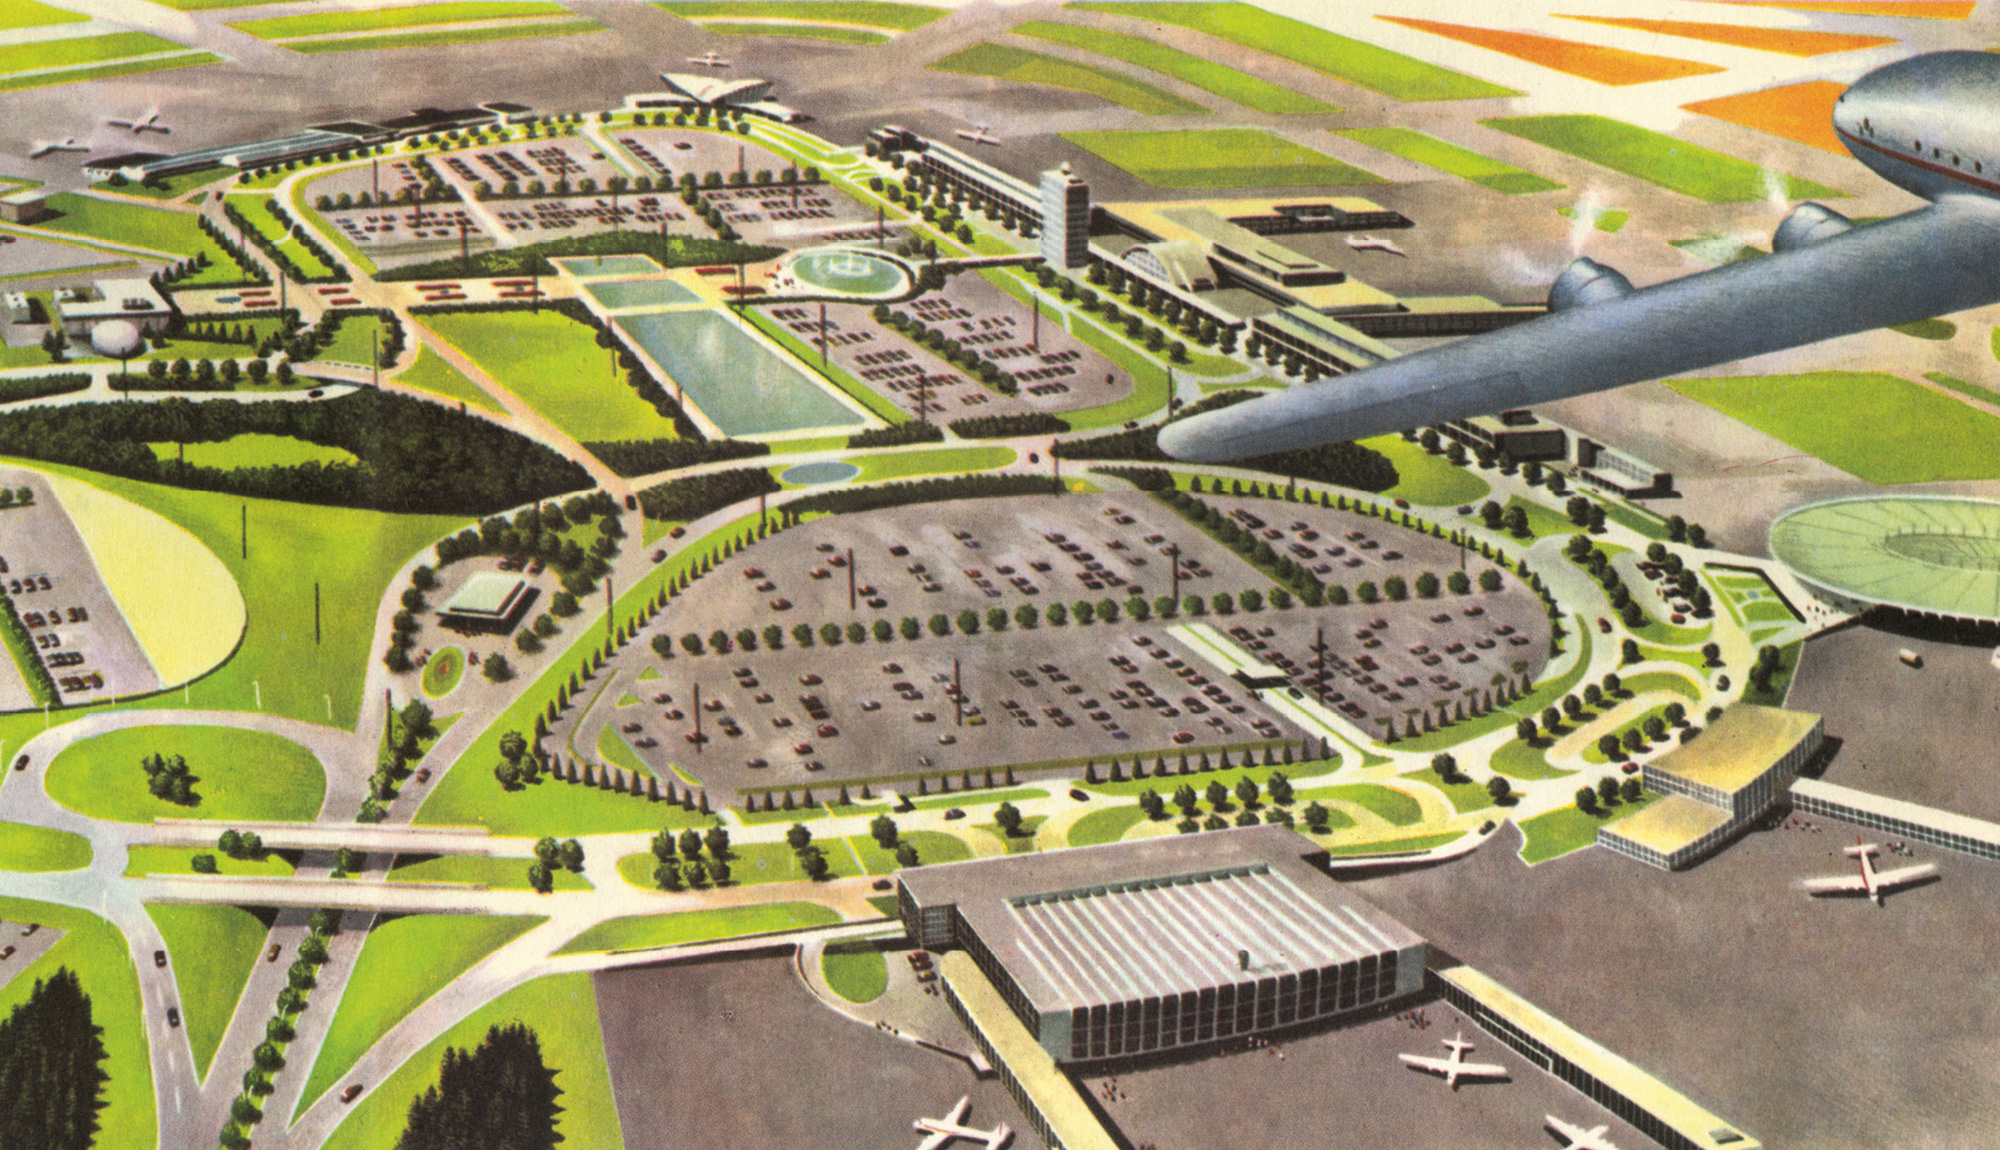 Nineteen sixty artist rendition of Idlewild International Airport (now John F. Kennedy International Airport). The original caption touts “a new type of imbedded light that enables planes to land in almost any kind of weather.”